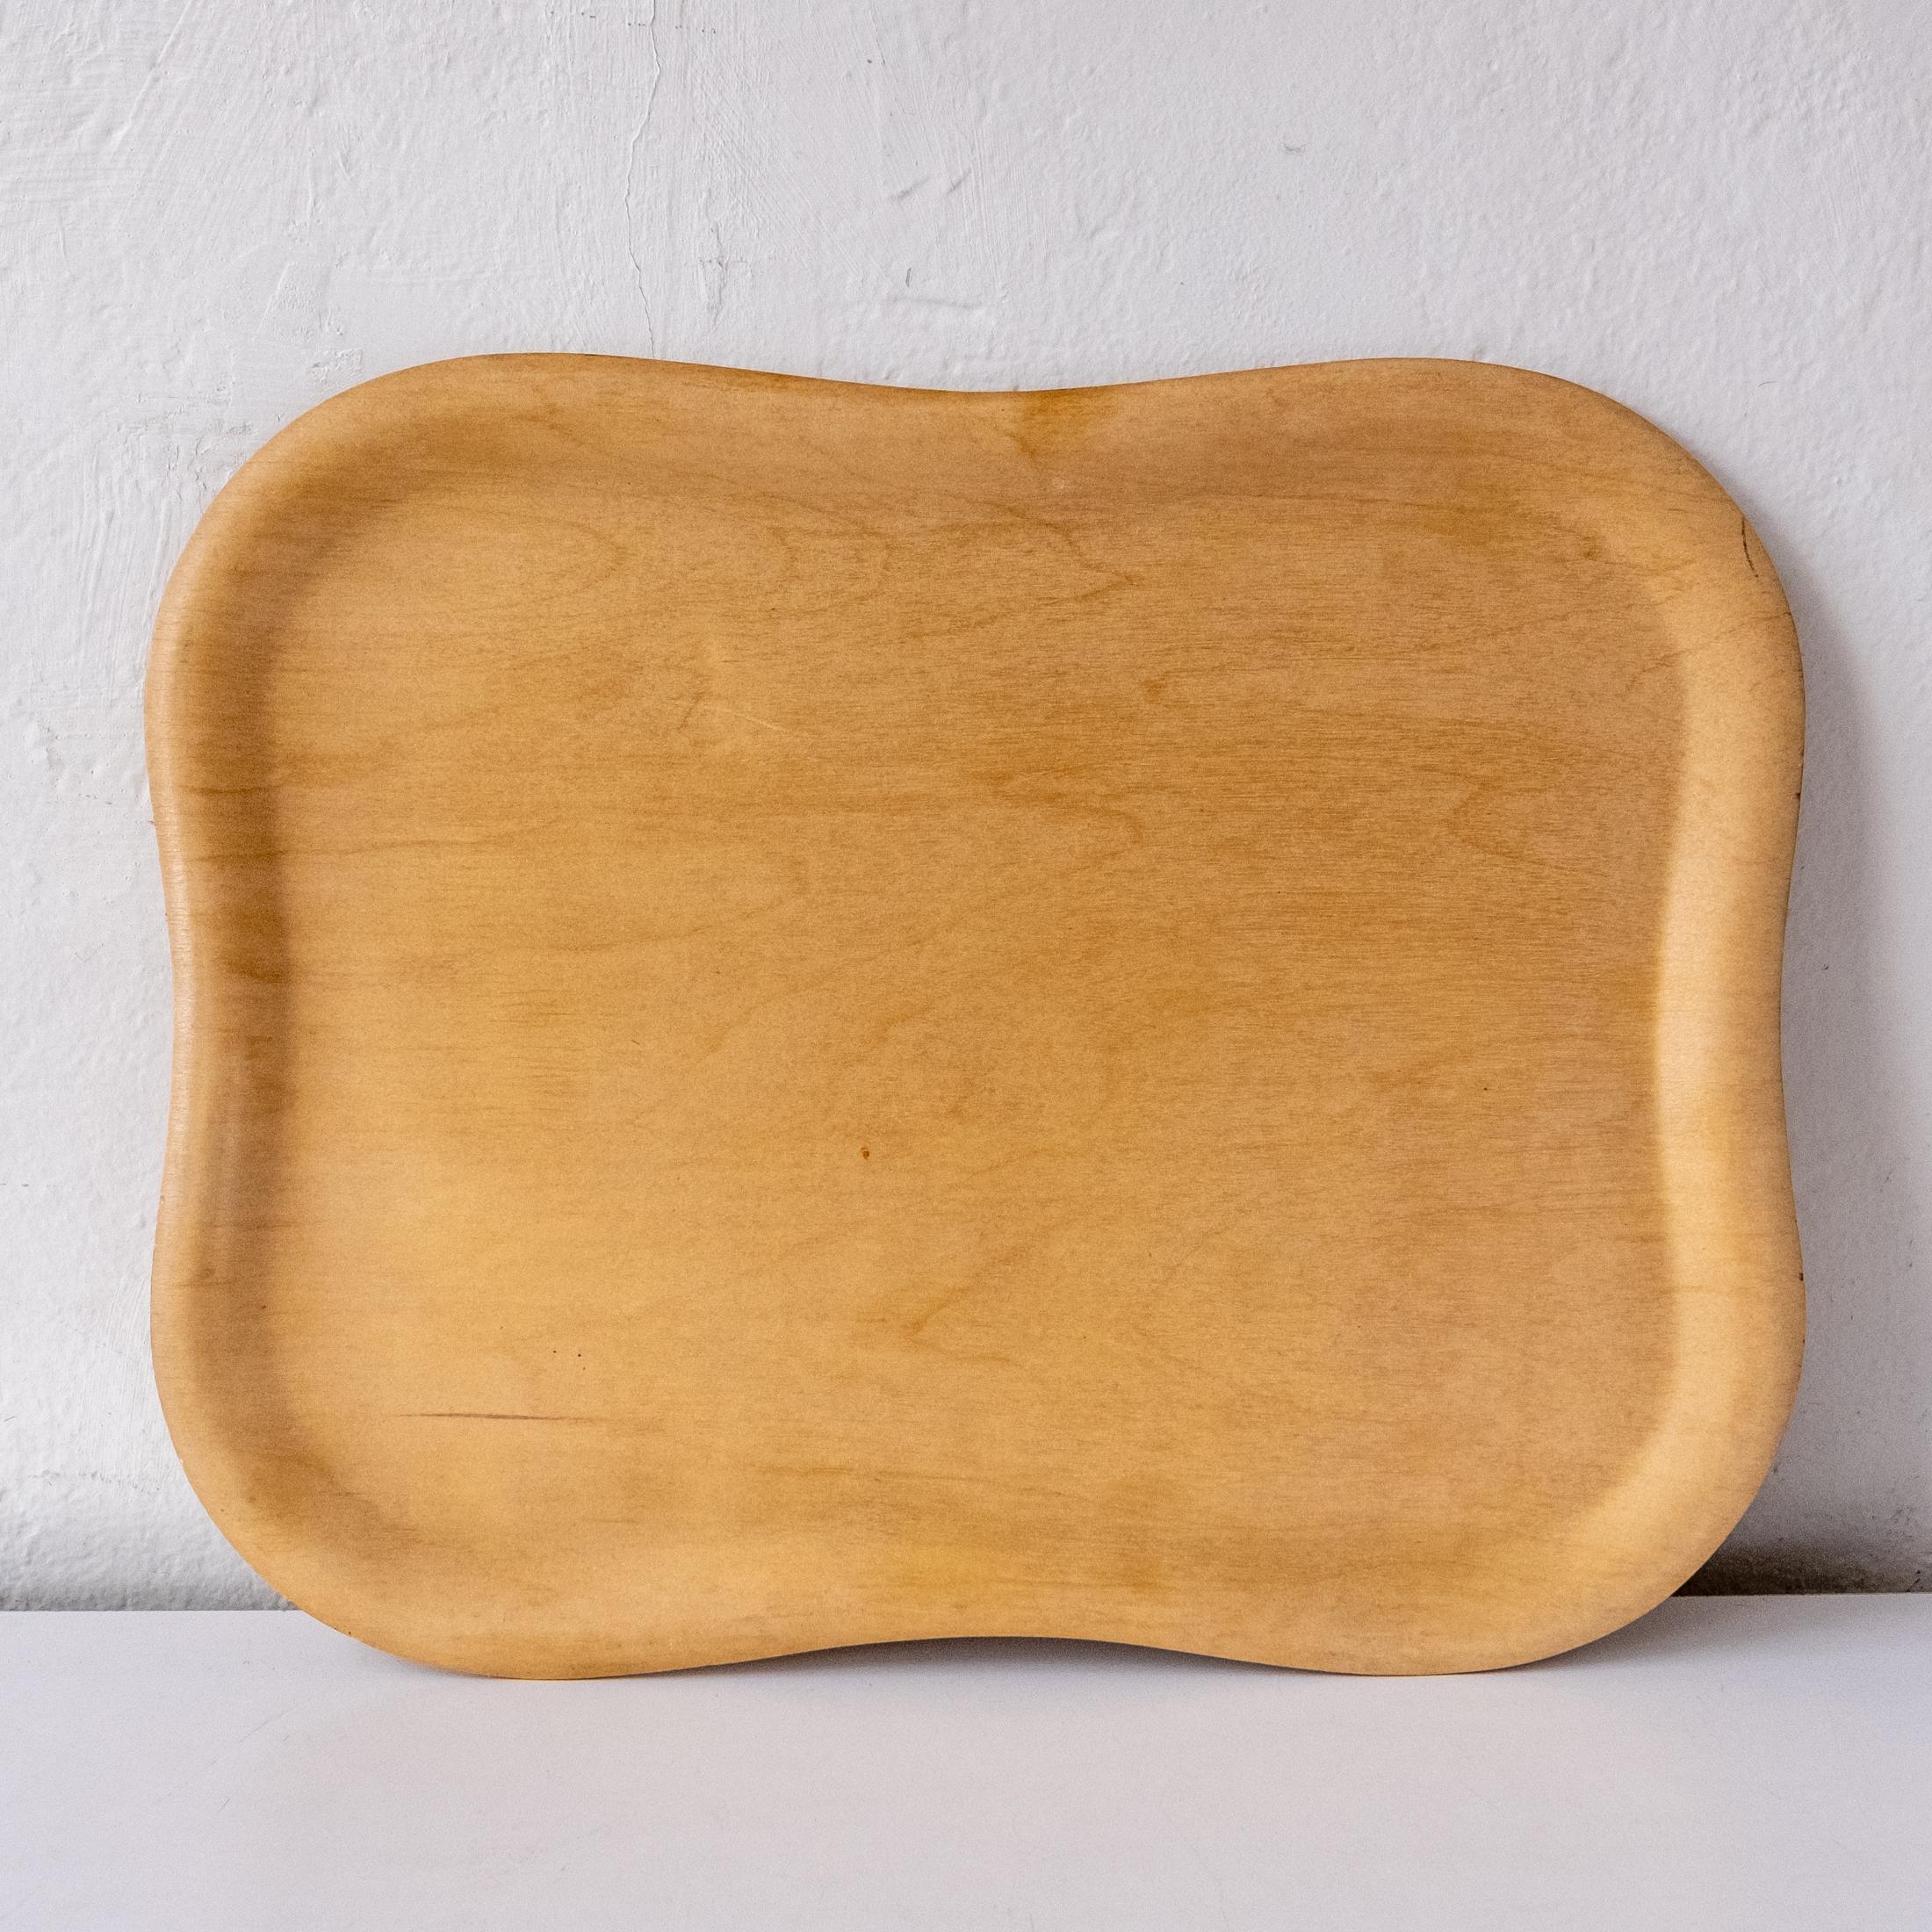 Tapio Wirkkala Freeform Molded Plywood Tray, 1950s In Good Condition For Sale In San Diego, CA